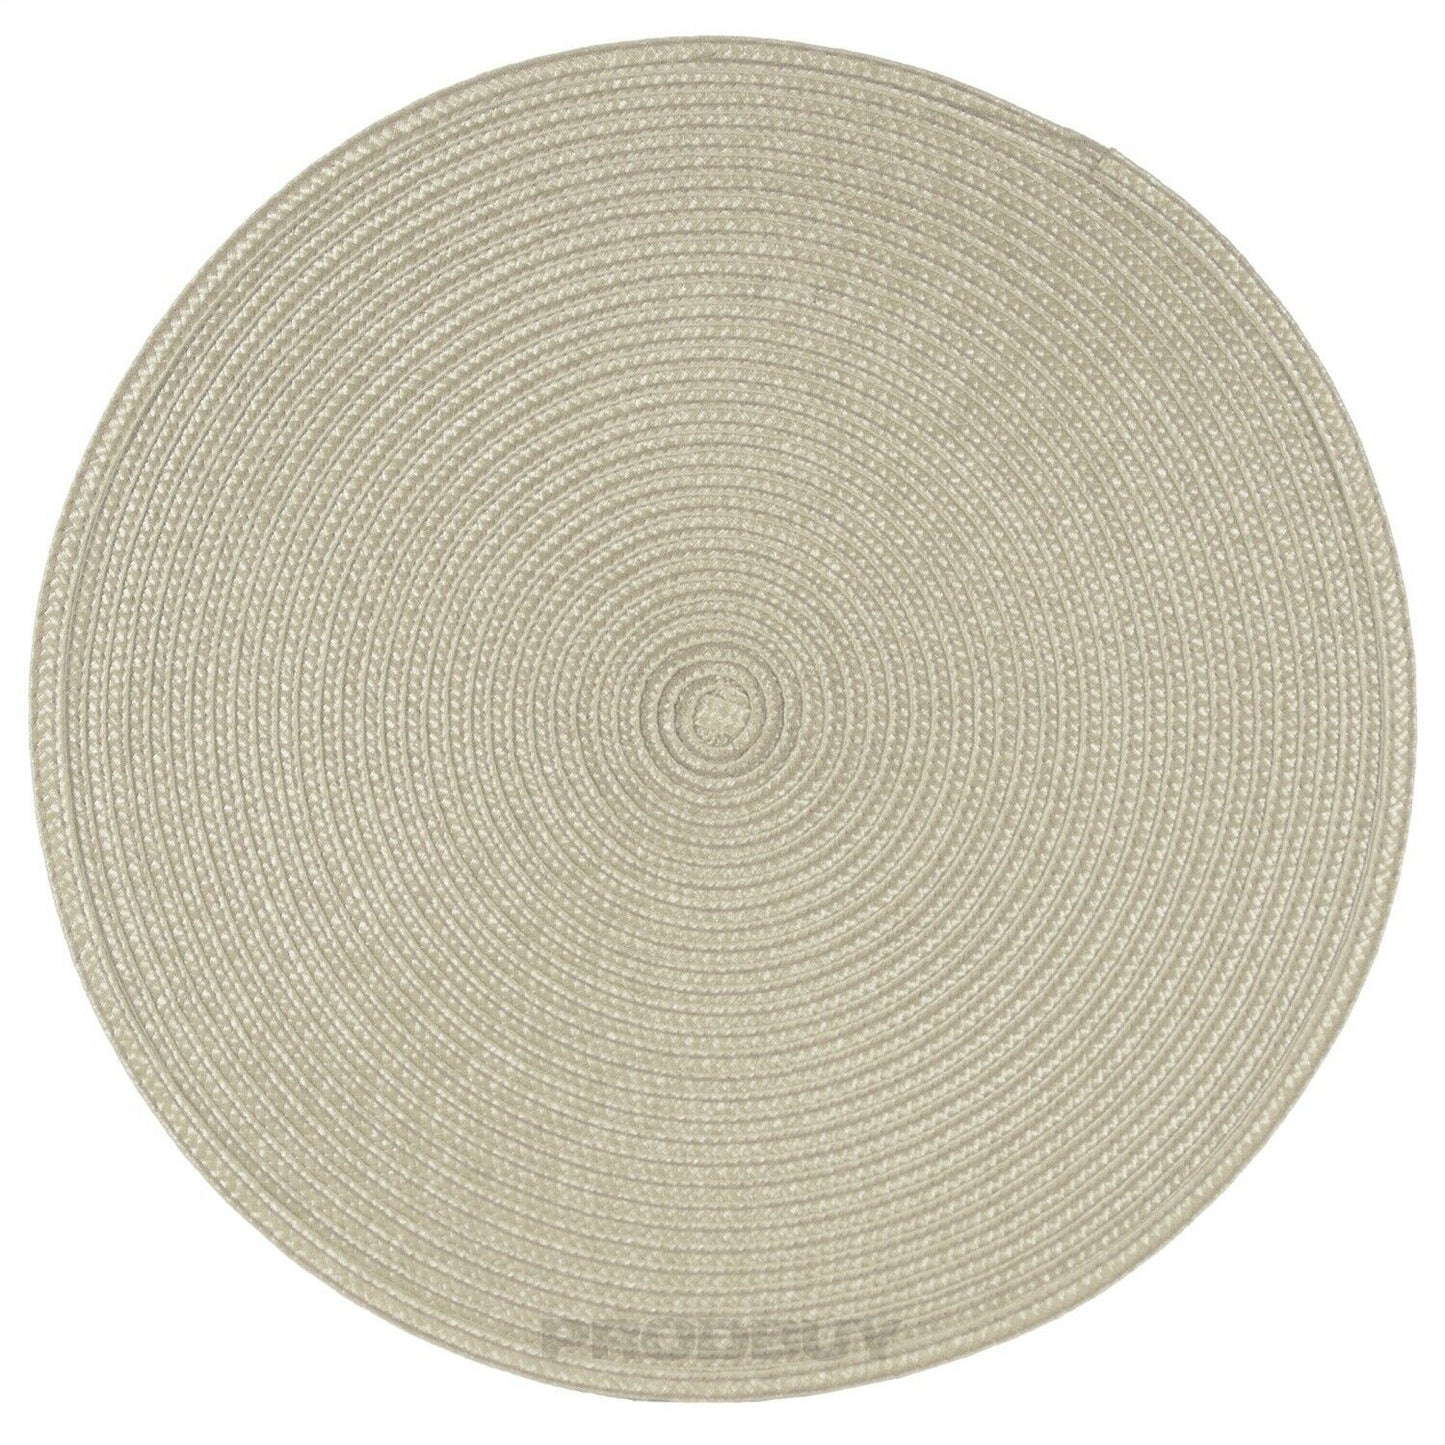 4 x 33cm Round Woven Beige Fabric Placemats Place Setting Mats